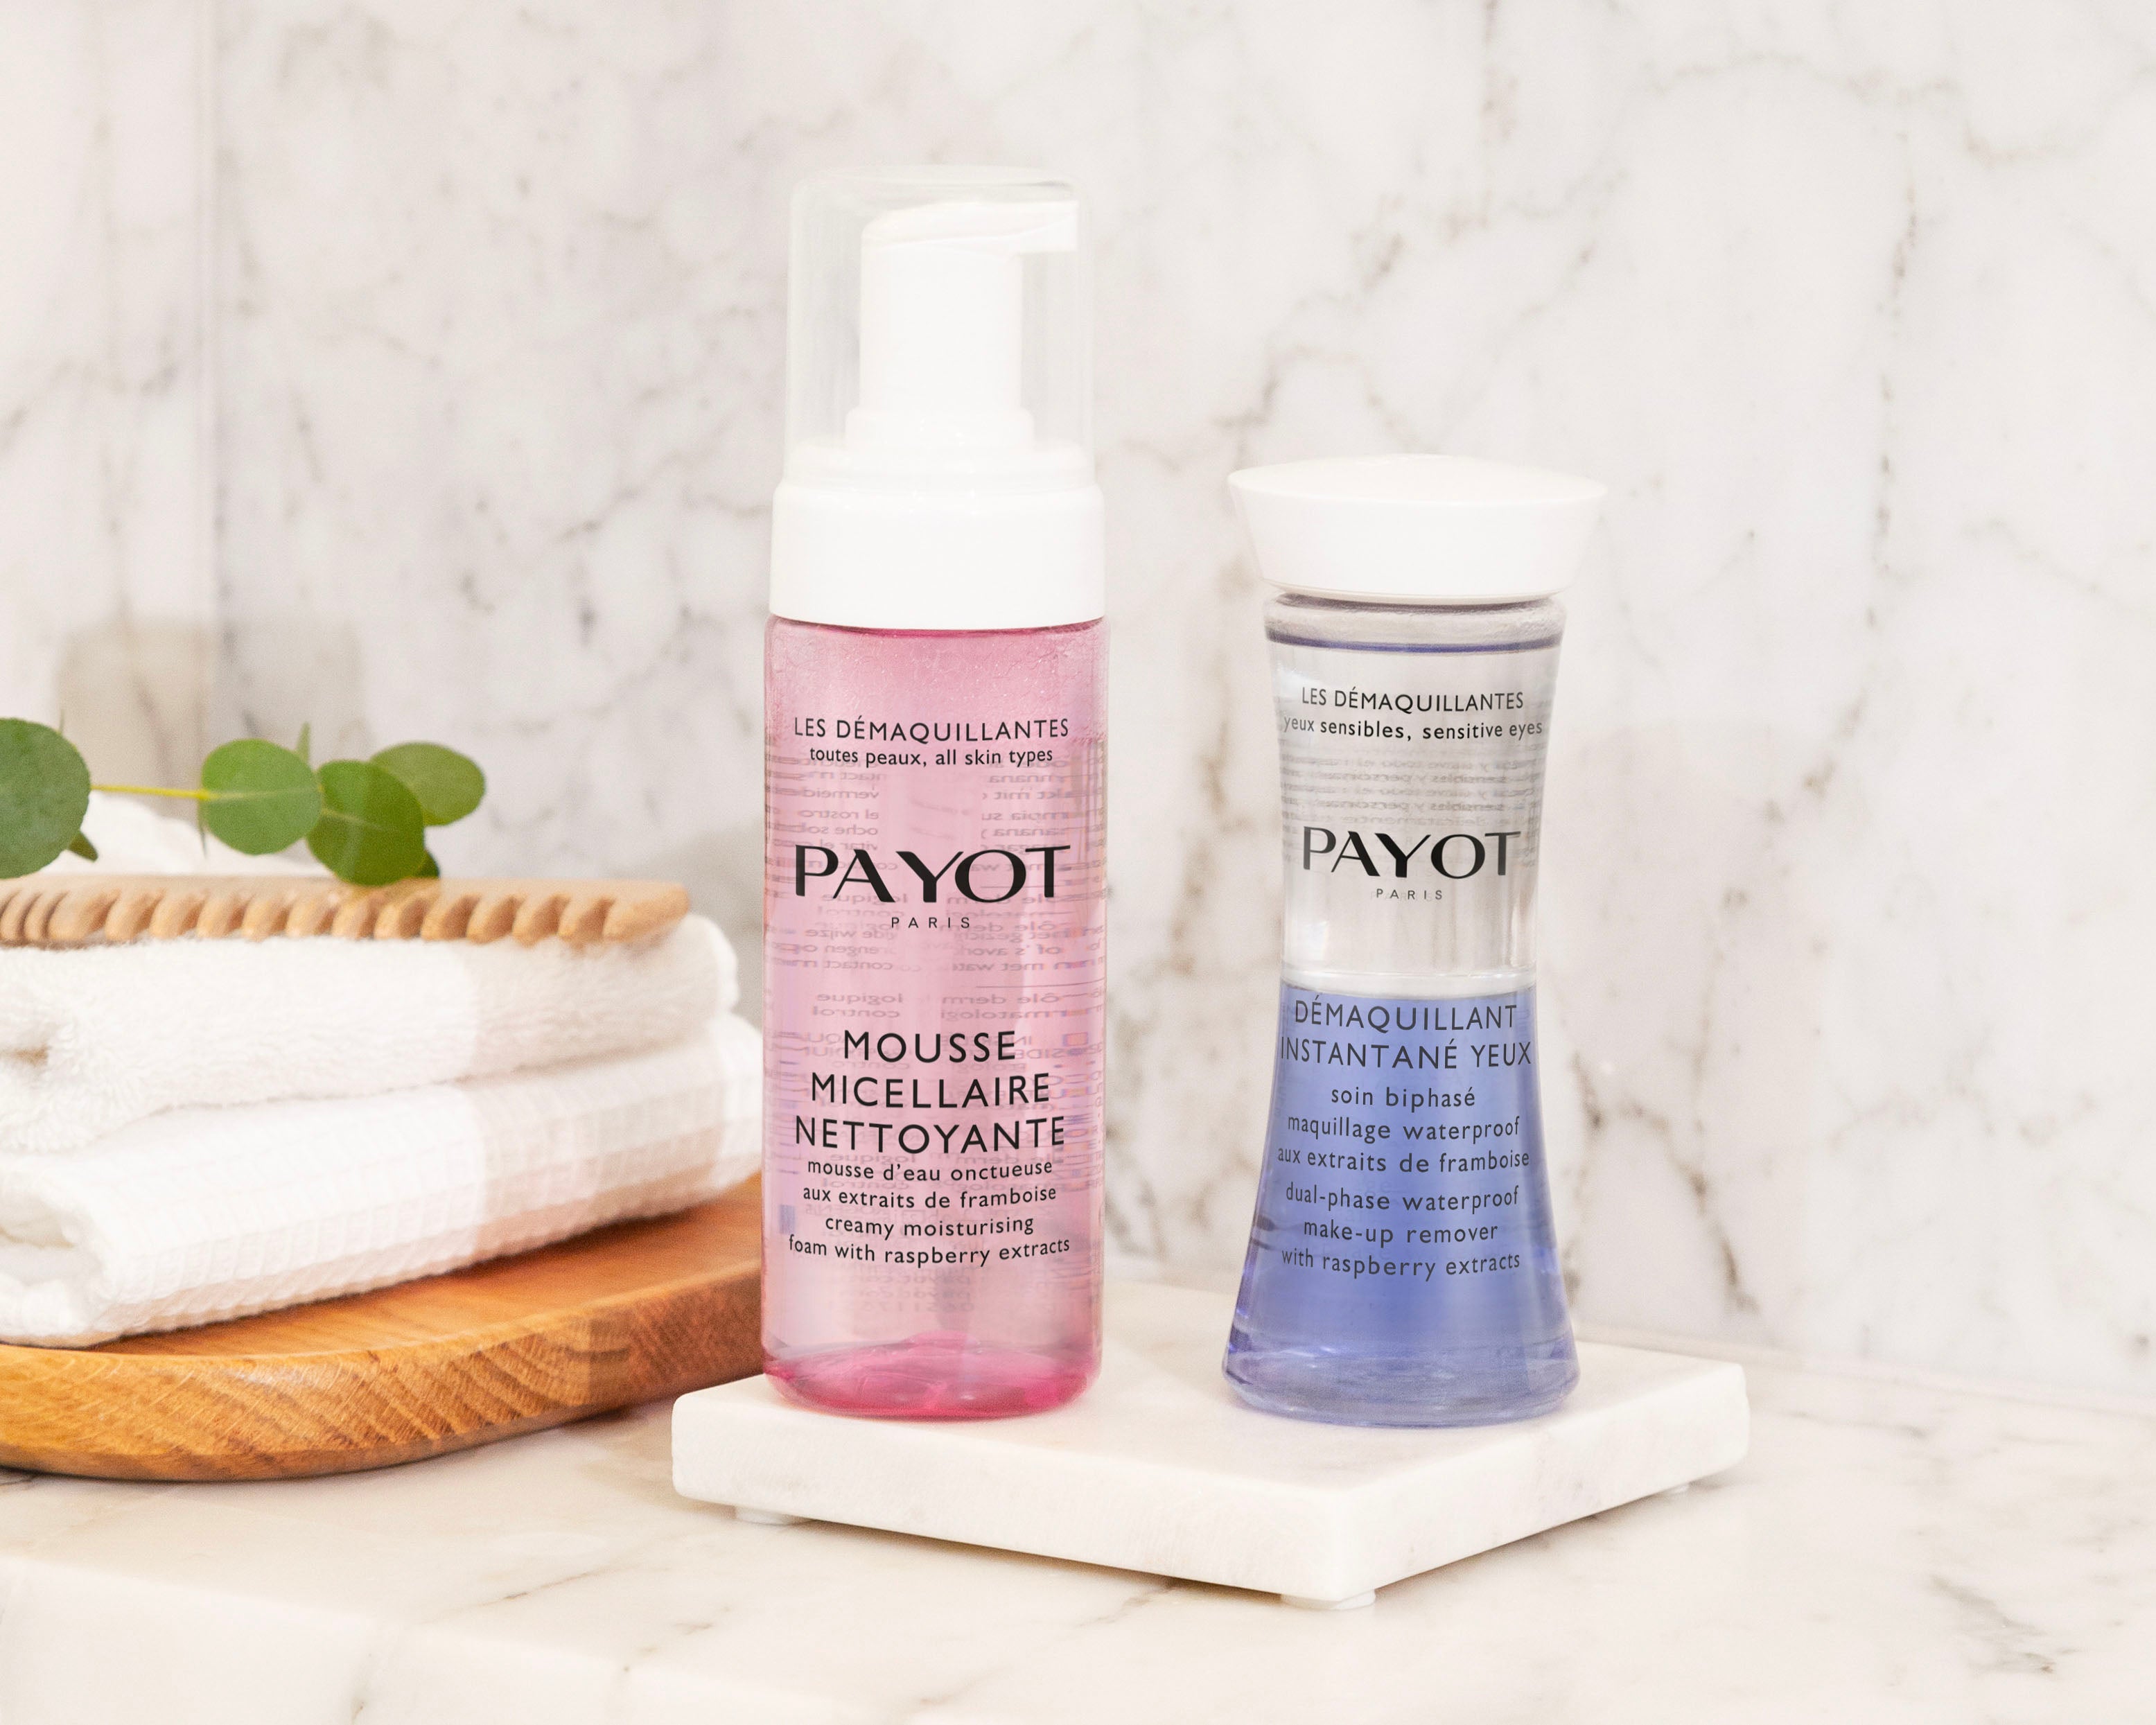 How to cleanse your skin properly? Payot